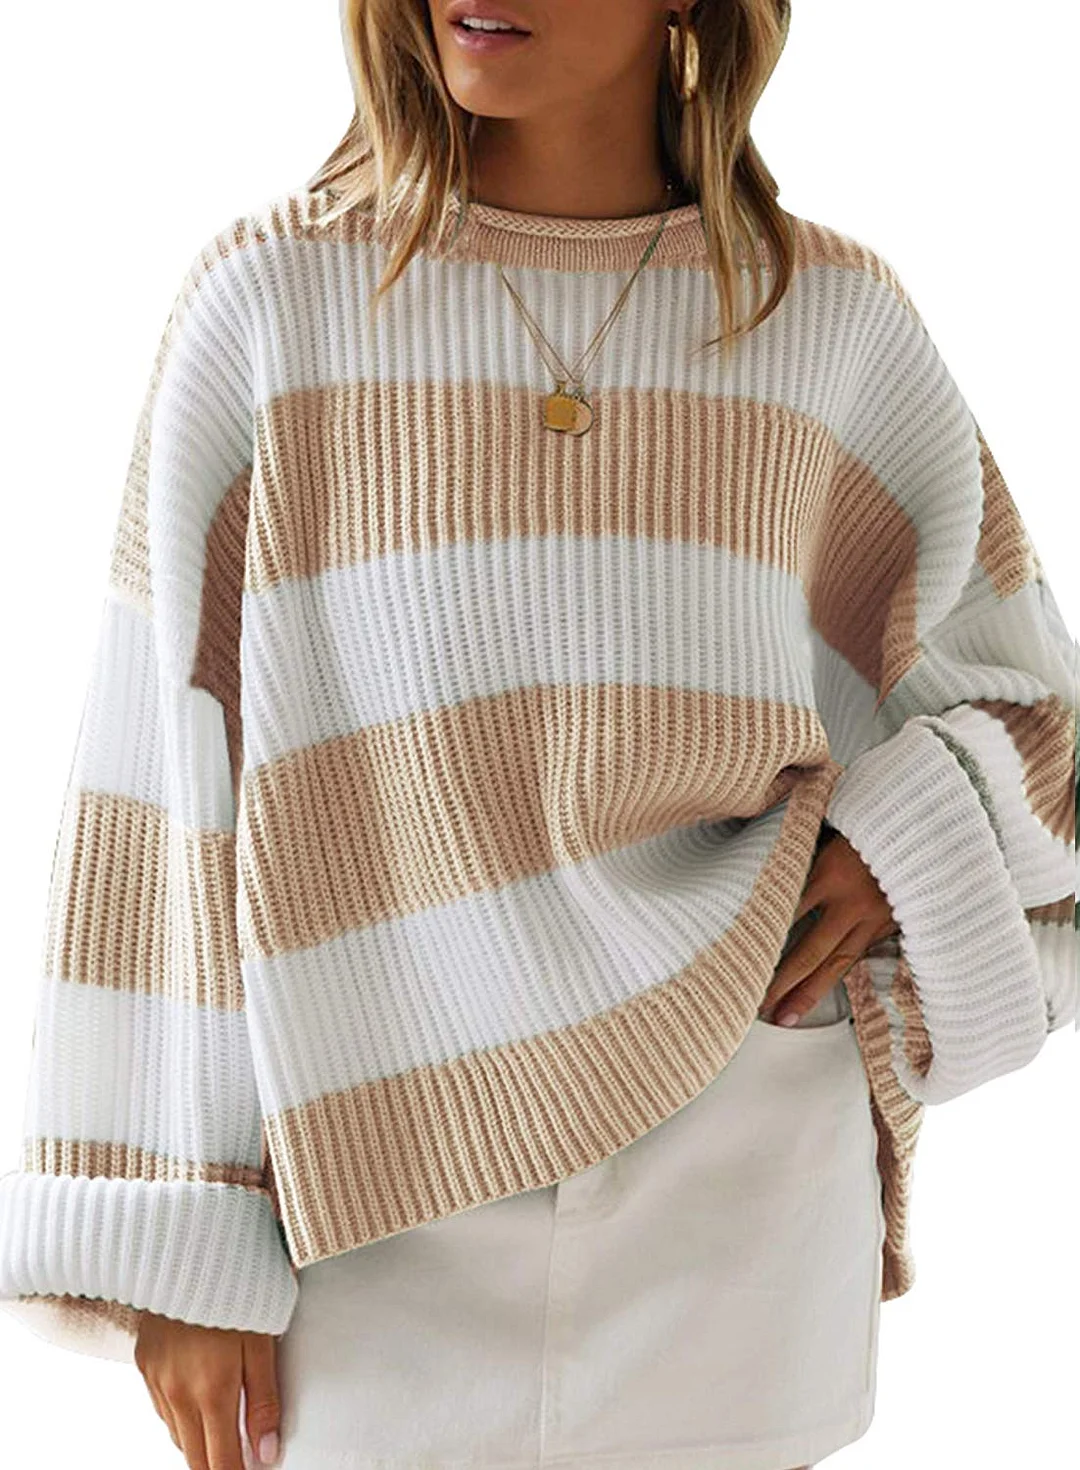 Women Color Block Striped Oversized Sweaters Long Sleeve Crewneck Pullover Loose Chunky Knit Jumper